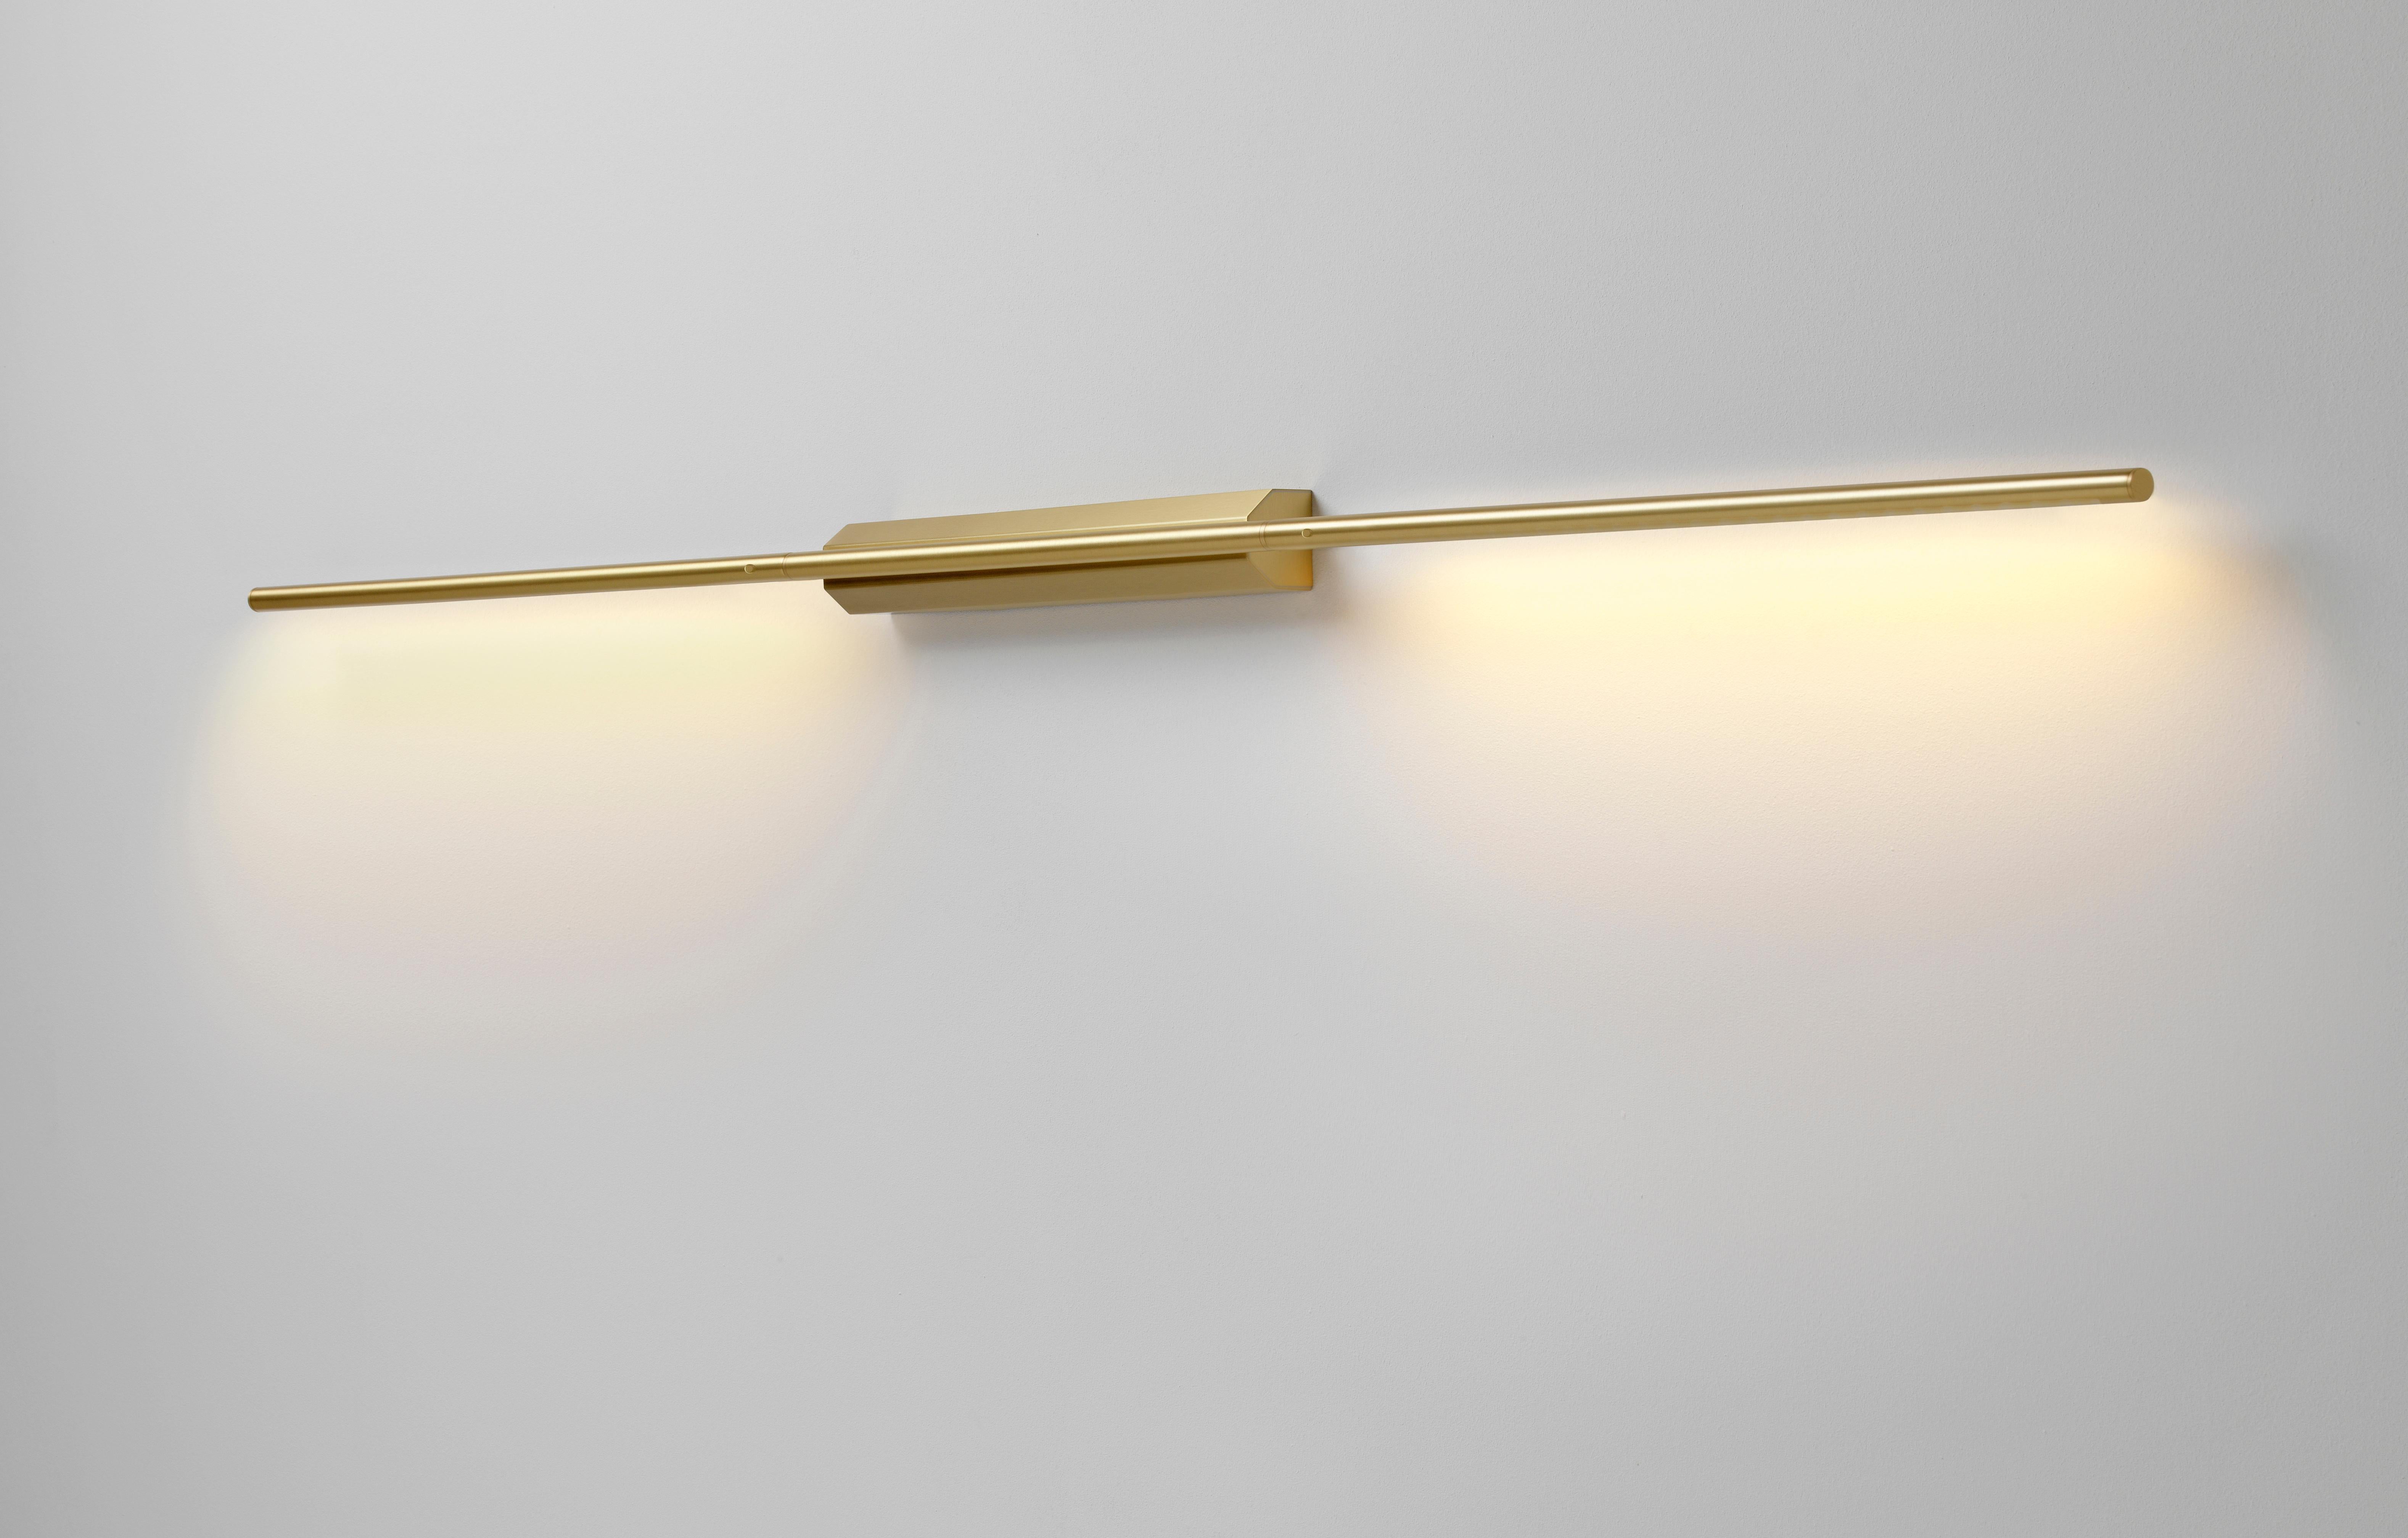 IP link double 960 Satin Graphite wall light by Emilie Cathelineau
Dimensions: D 4.5 x W 5 x H 96 cm
Materials: Solid brass, Satin Brass, LED, Polycarbonate.
Others finishes and dimensions are available.

All our lamps can be wired according to